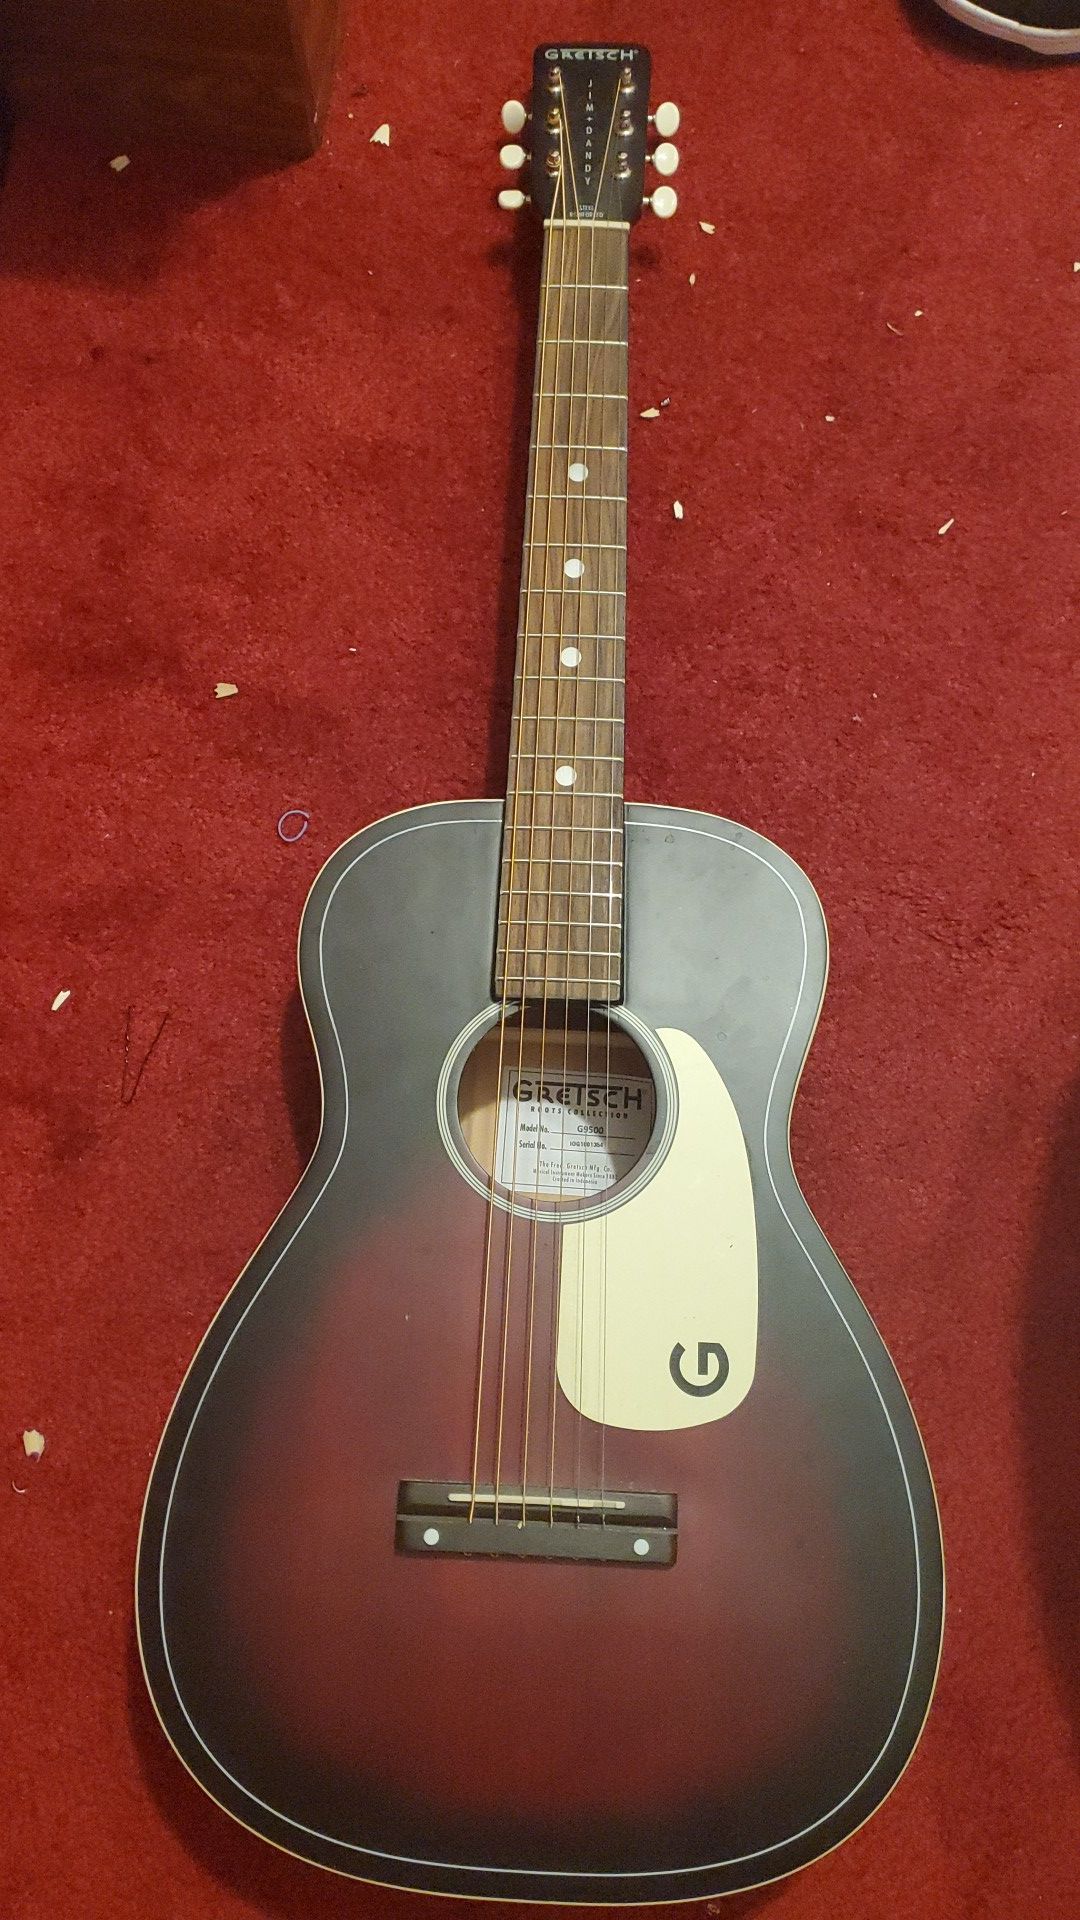 Guitar bought it a year ago in great condition